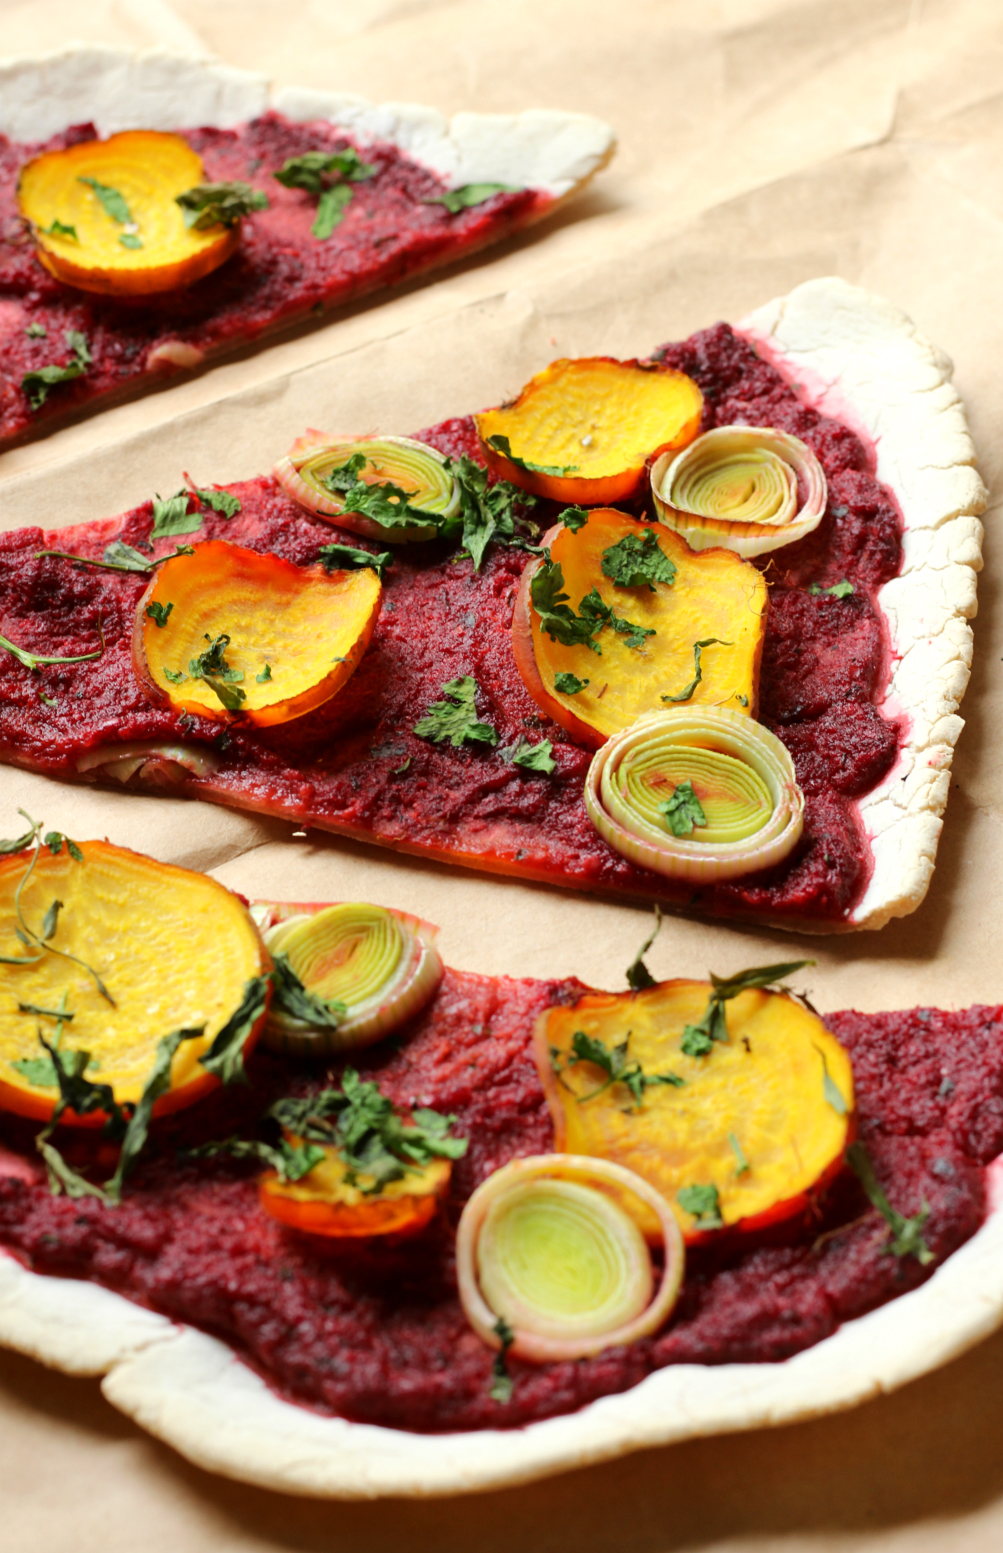 Beet & Leek Cassava Crust Pizza | Strength and Sunshine @RebeccaGF666 It's pizza time! A healthy beet & leek cassava crust pizza that's gluten-free, vegan, nut-free, and paleo. A fantastic whole food pizza recipe for a weeknight dinner, but fancy enough for a date night!